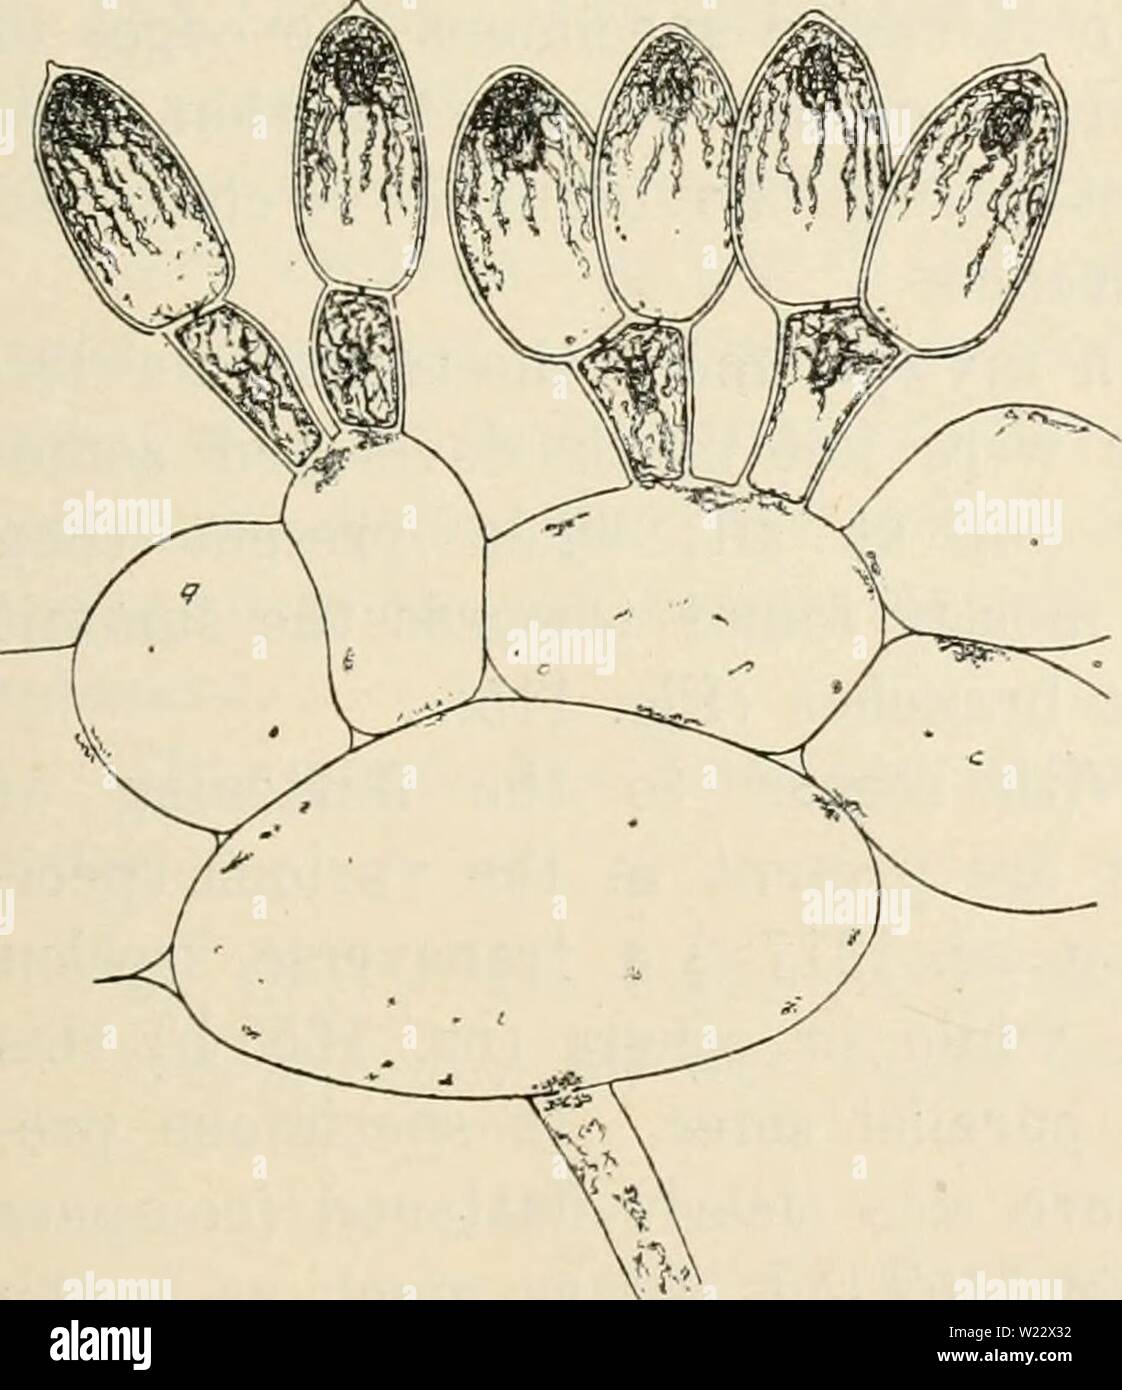 Archive image from page 114 of Dansk botanisk arkiv (1913-1981). Dansk botanisk arkiv  danskbotaniskark03dans Year: 1913-1981  Fig. 115. Galaxaura marginata (Solan- der). Part of a plant (About 1,5:1). hand one is found collected by LiEBMAN at Havana and determined by Kjellman as G. marginata. Most prob- ably this is the specimen he refers to. Kjellman points out that the specimens examined by him agree well with the figure of SoLANDER, and as both plants also have been collected in nearly the same area he considers himself en- titled to refer Areschoug's specimens to Solander's species. The r Stock Photo